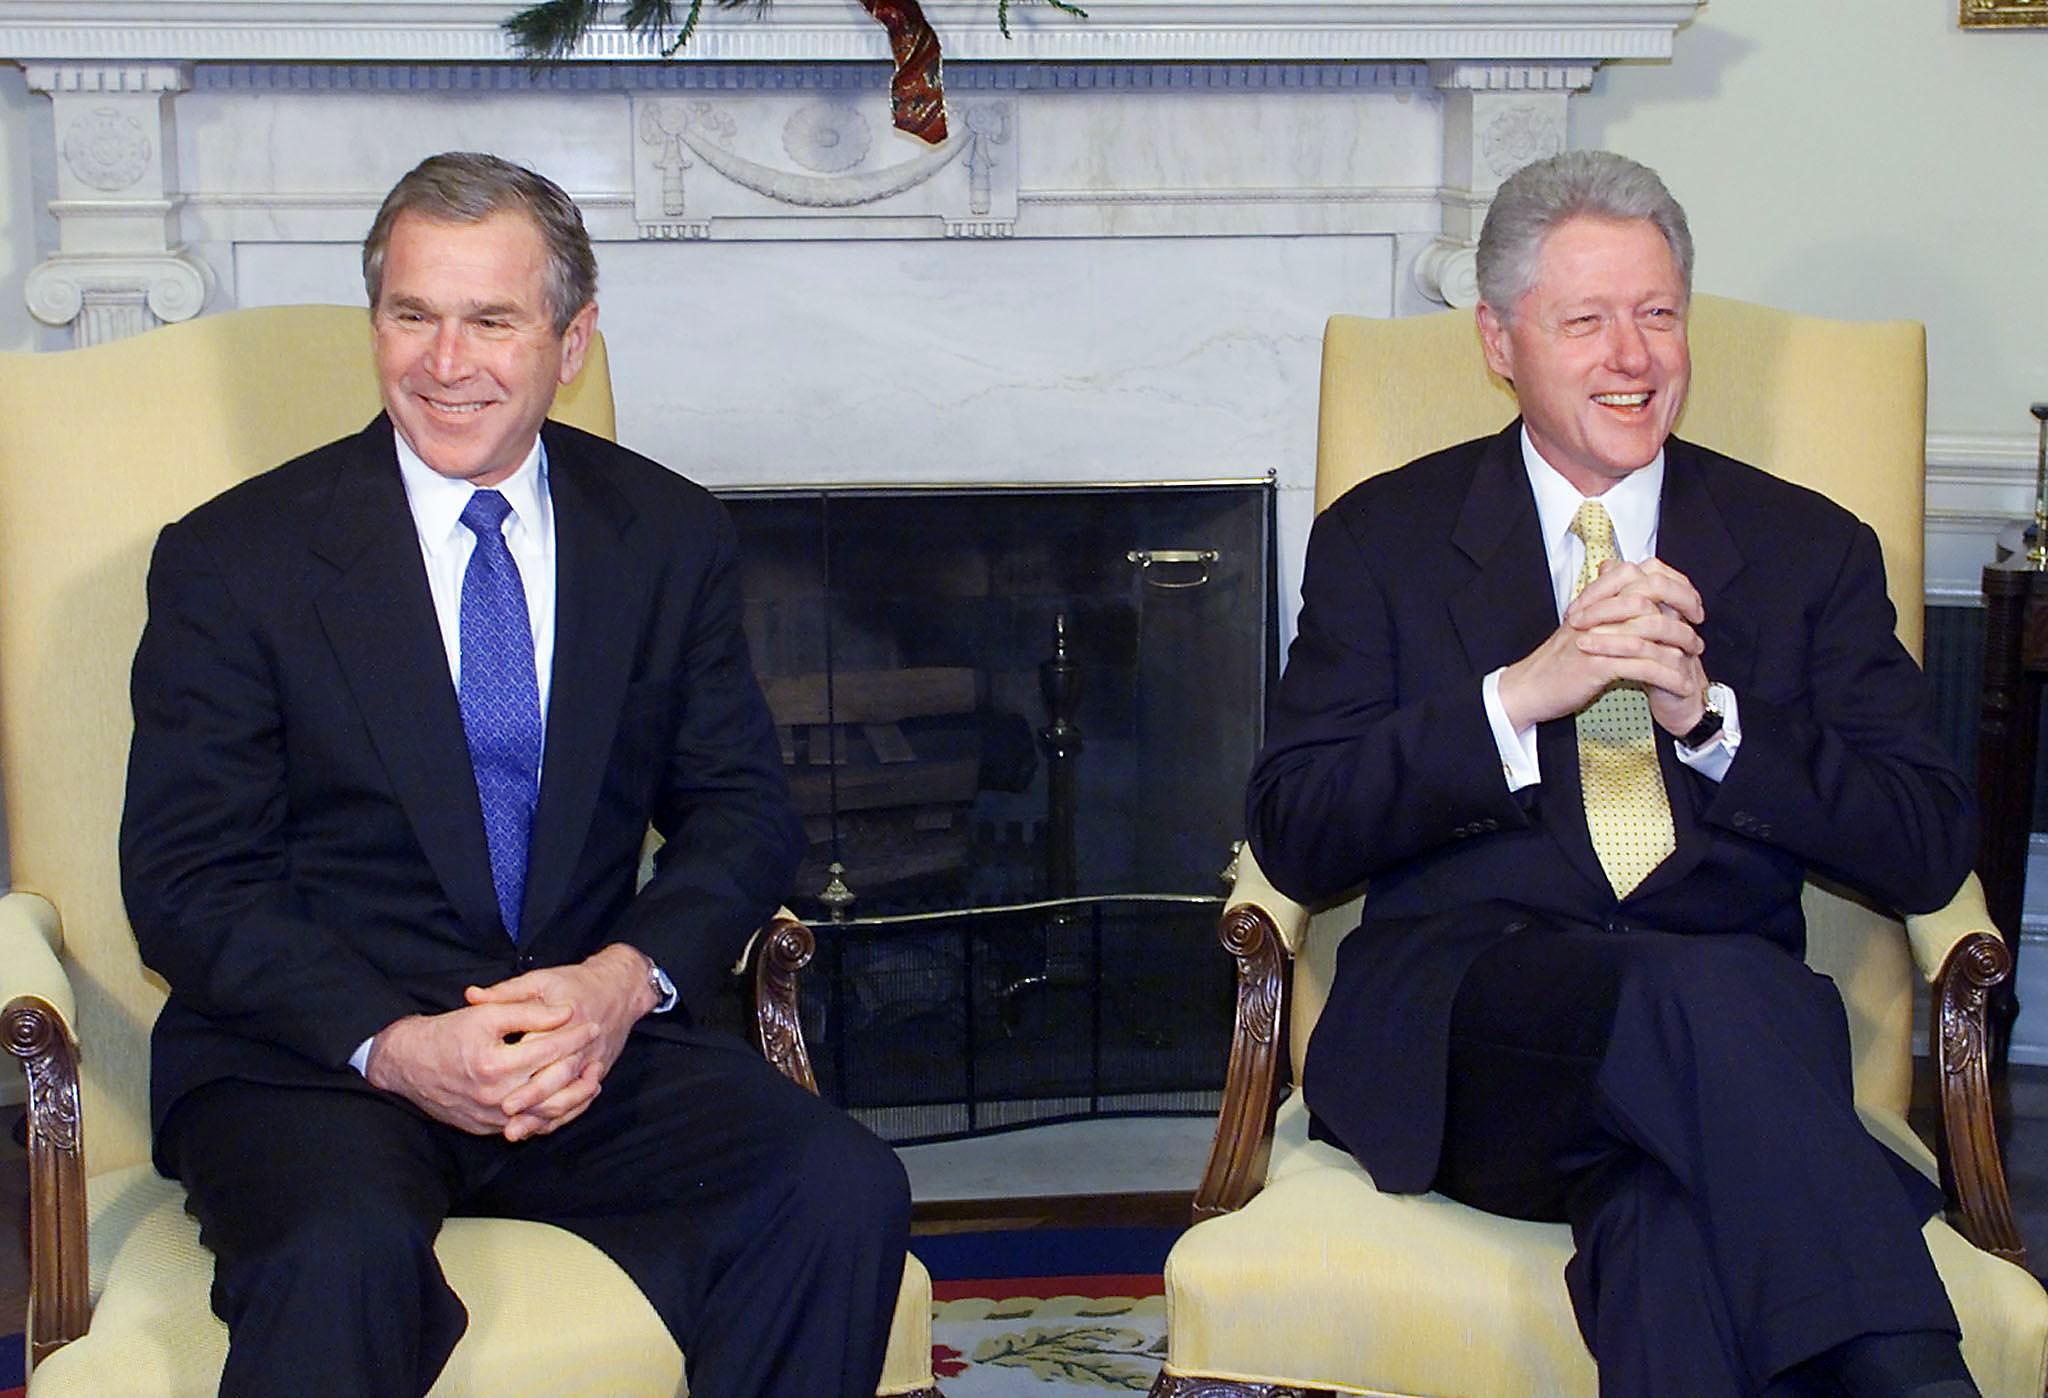 PHOTO: President BIll Clinton meets with President-elect George W. Bush on Dec. 19, 2000 at the White House for discussions on the transition to power.